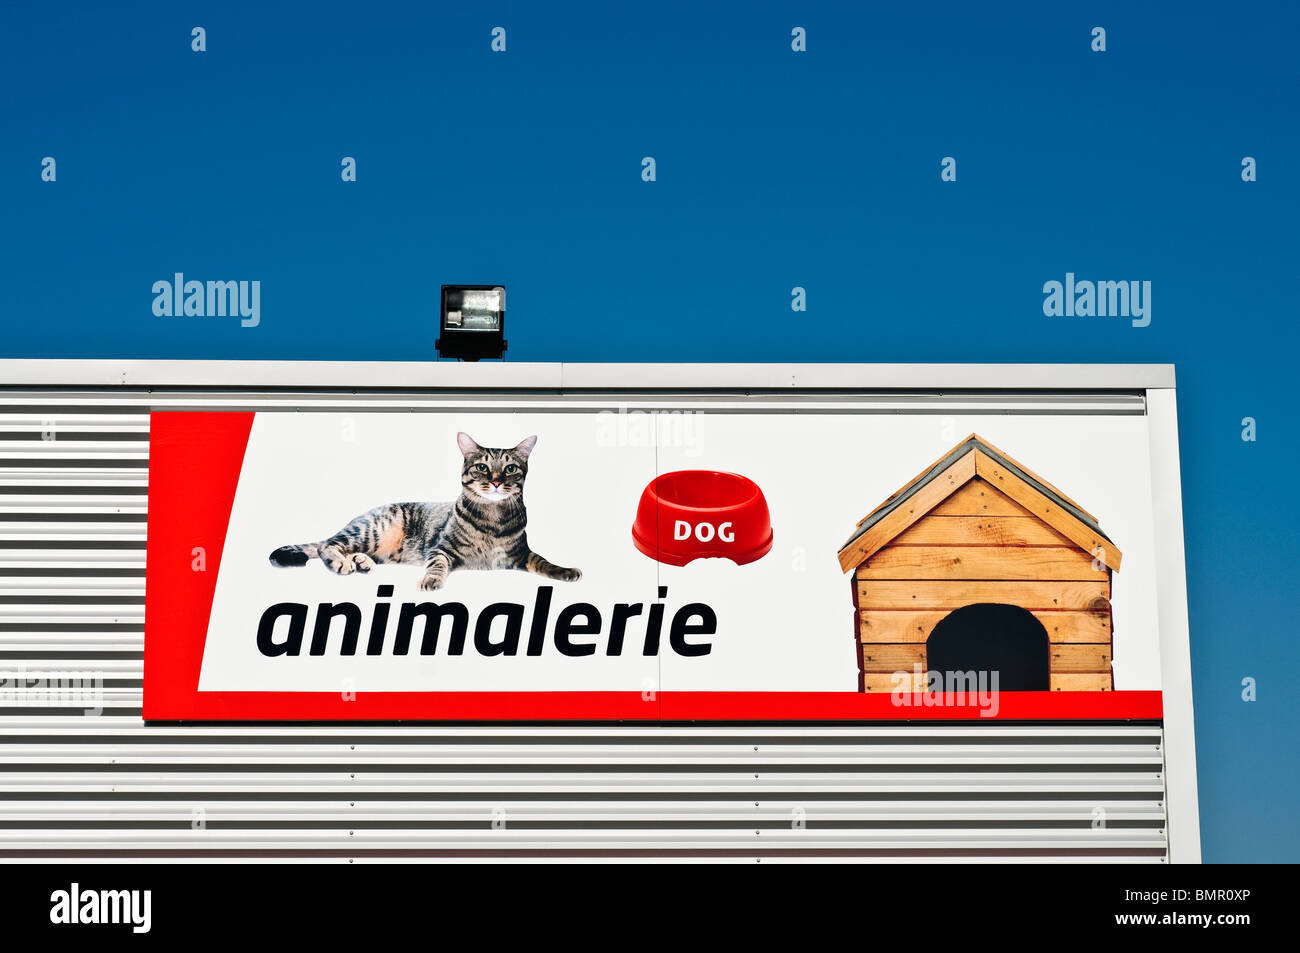 Bricomarché D-I-Y store 'animalerie' supplies advertising sign, France. Stock Photo